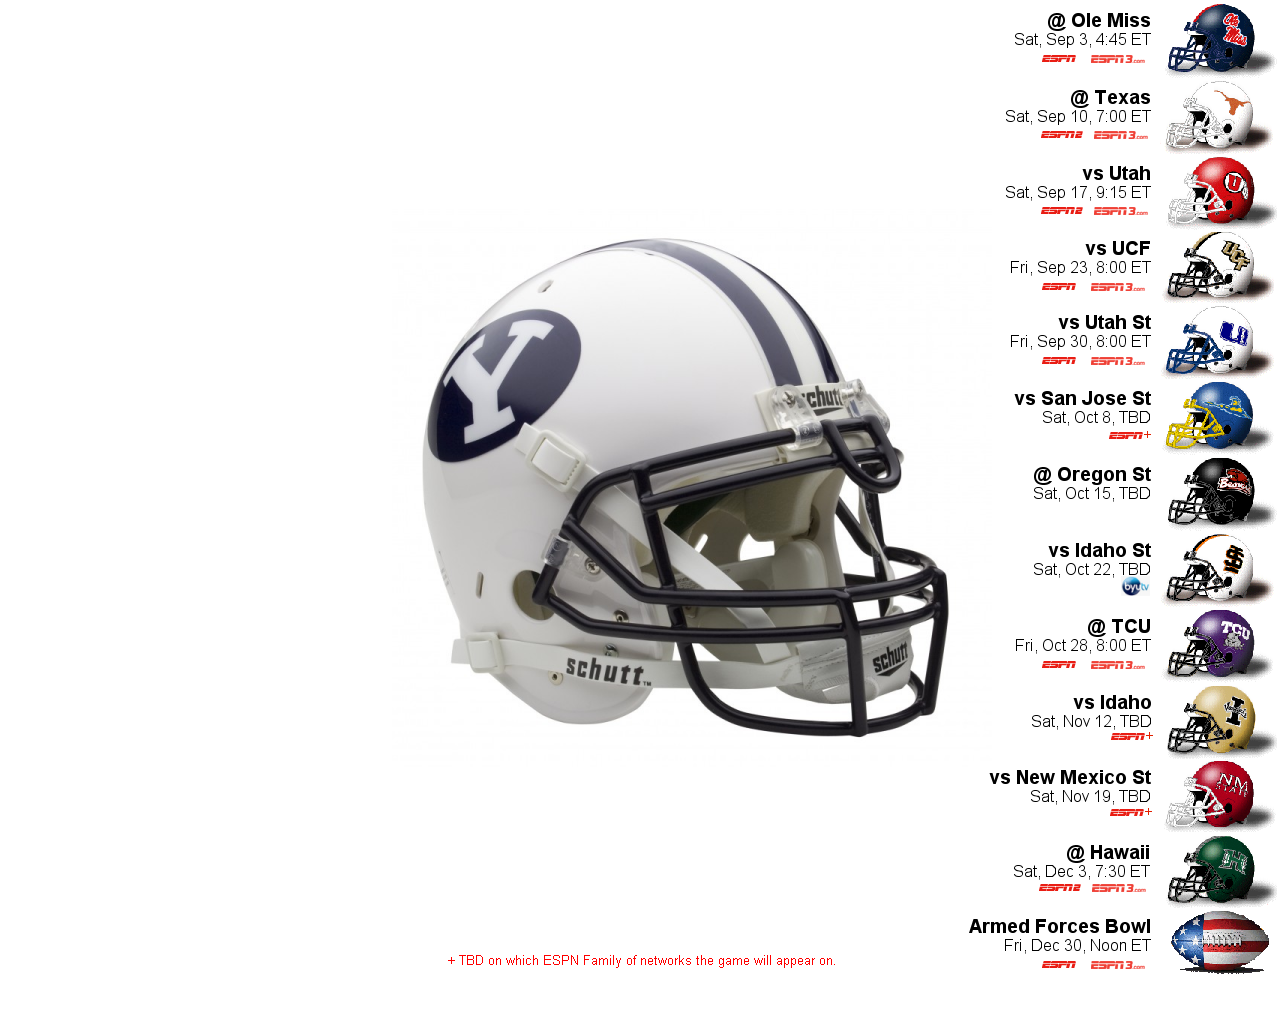 2015 Byu Football Schedule Backgrounds